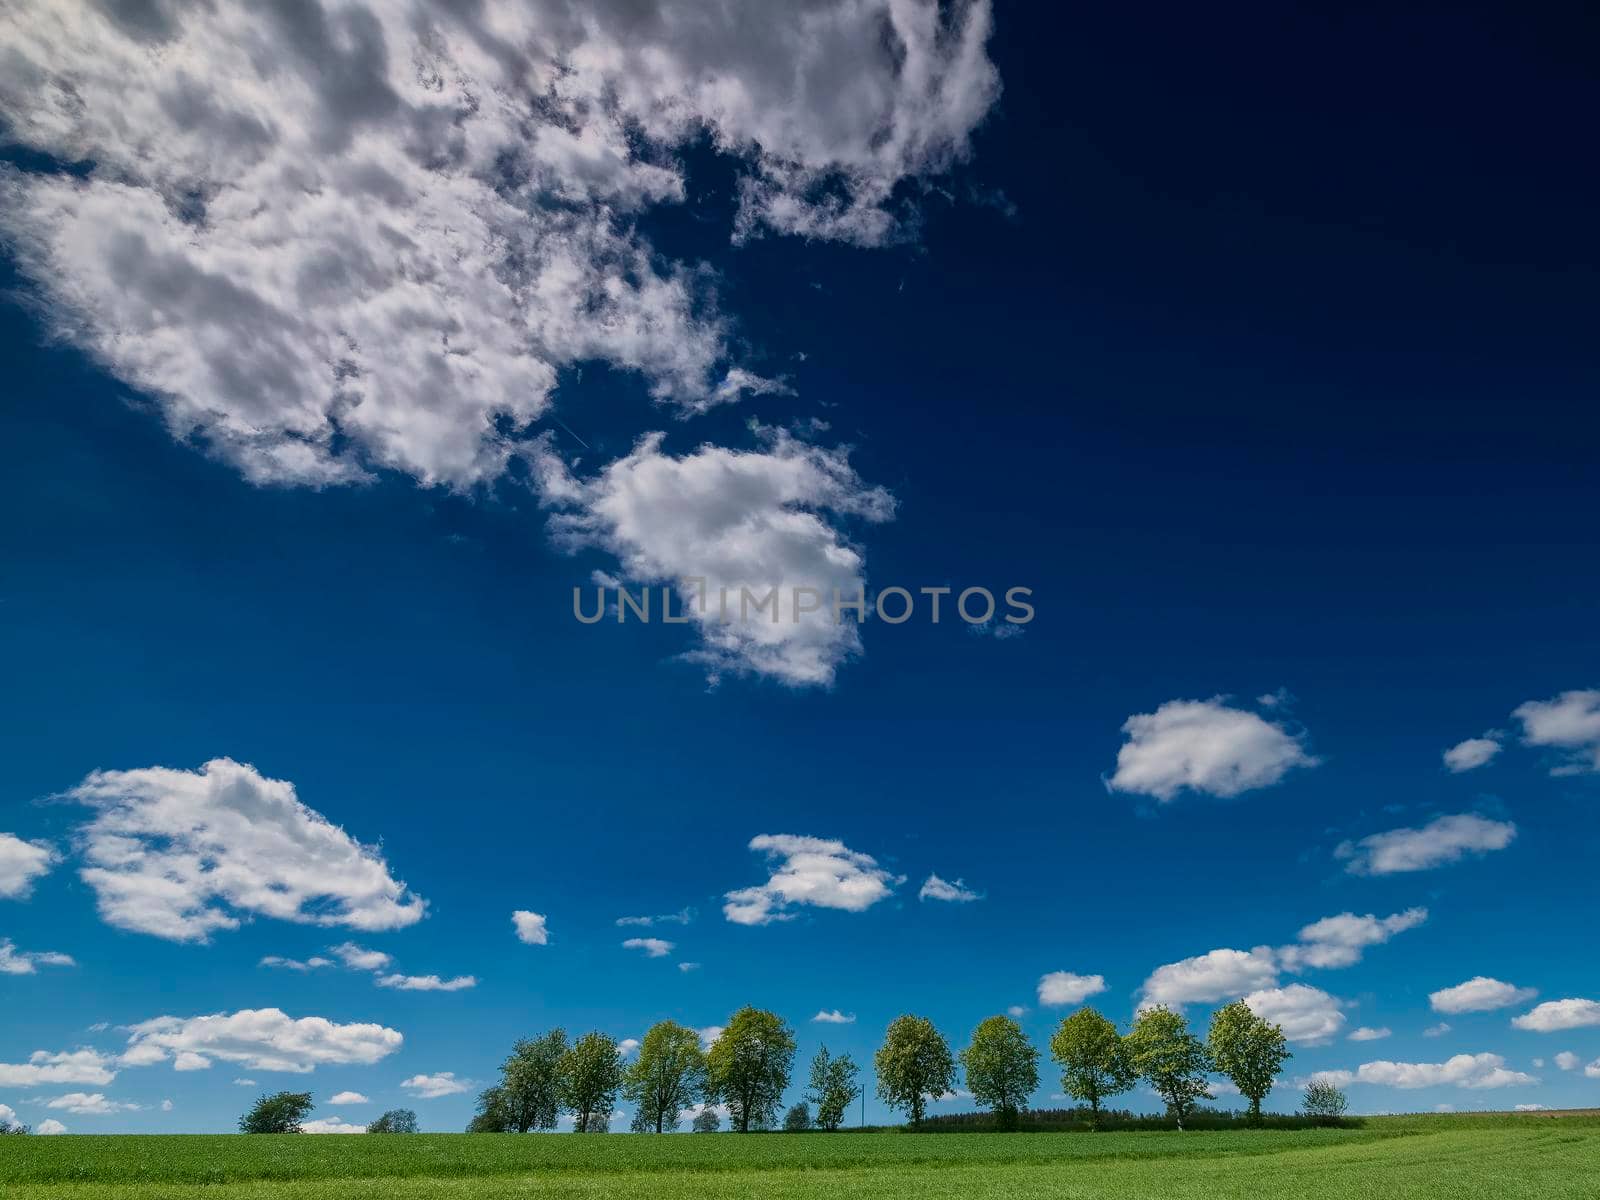 Row of trees in the field with view towards the clouds, trees in the field with clear clouds and blue sky, TREES IN THE FIELD WITH VIEW TO HEAVEN by isaiphoto